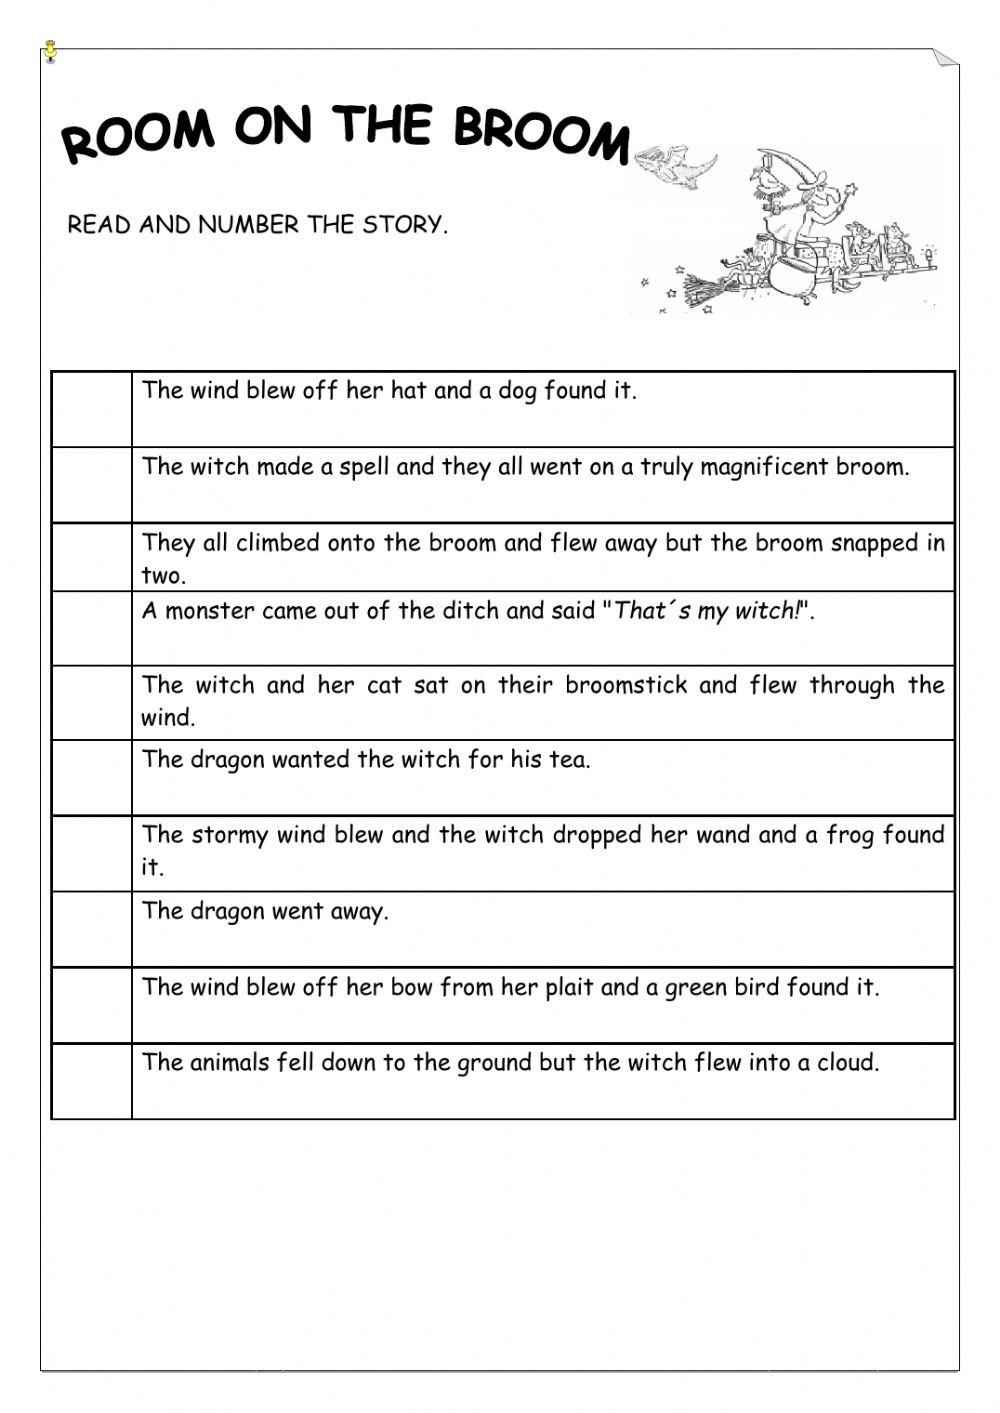 Room on the broom reading activity